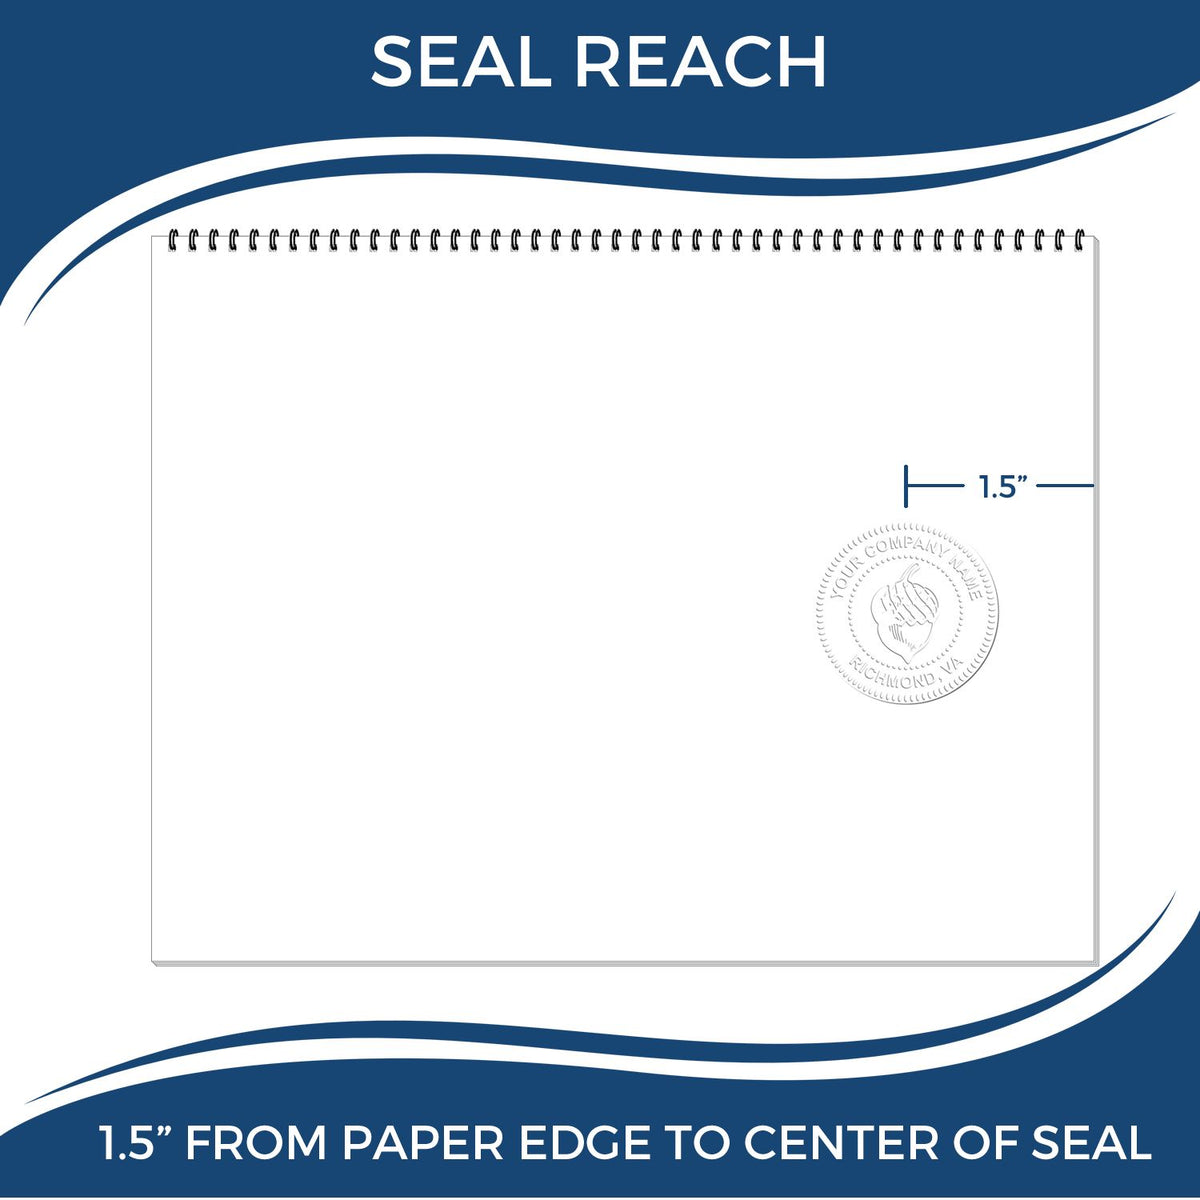 An infographic showing the seal reach which is represented by a ruler and a miniature seal image of the Hybrid New Mexico Geologist Seal